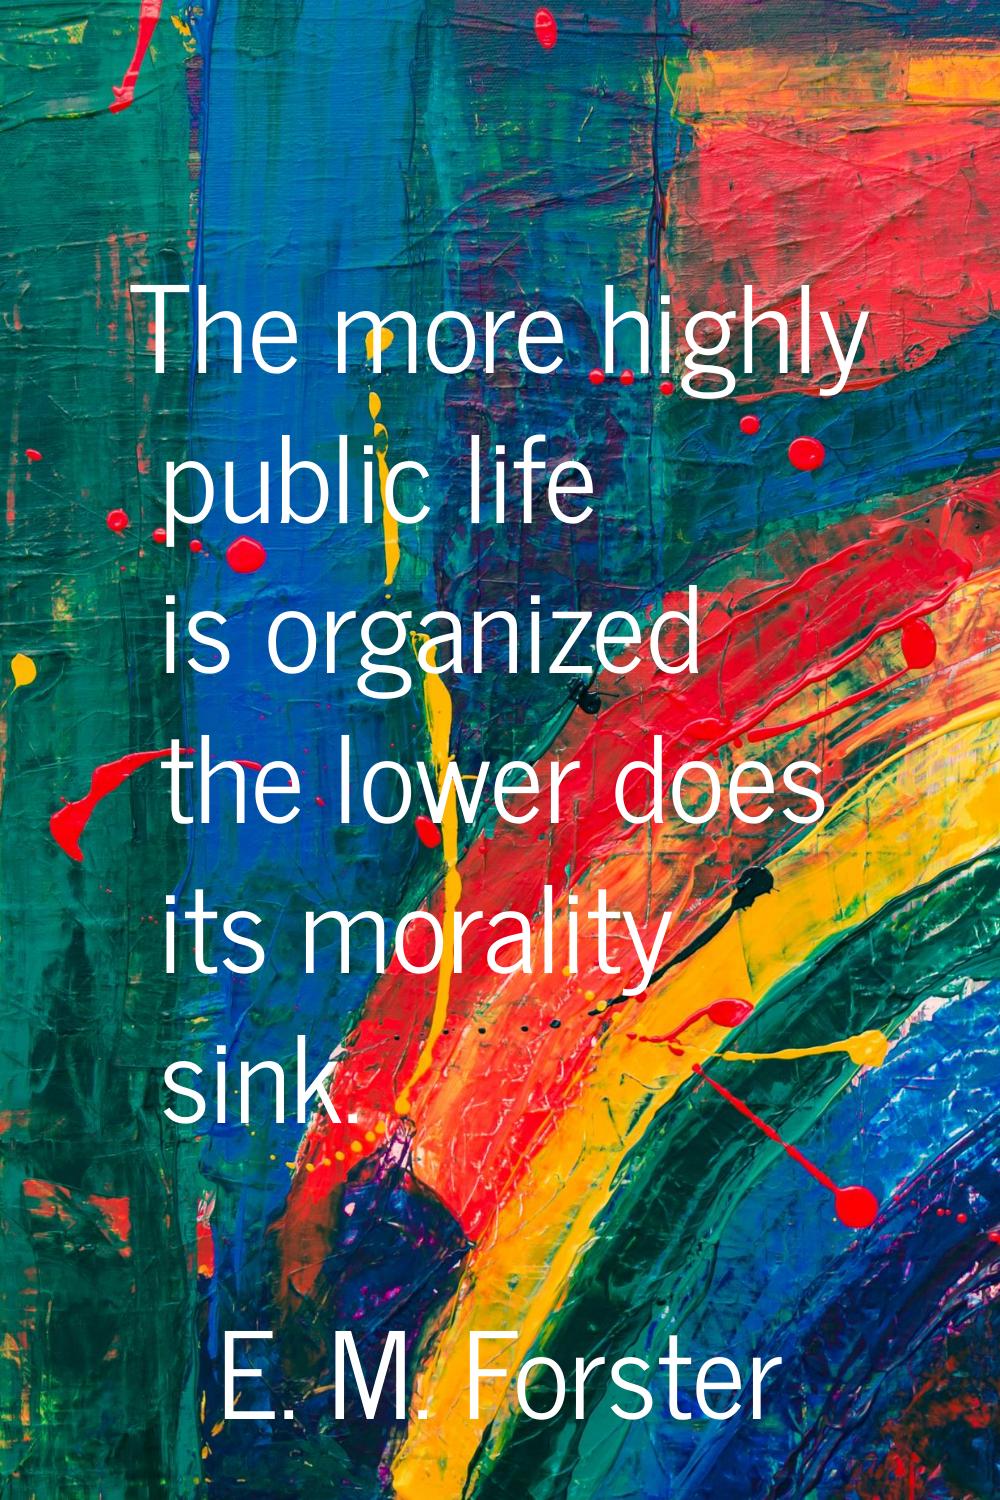 The more highly public life is organized the lower does its morality sink.